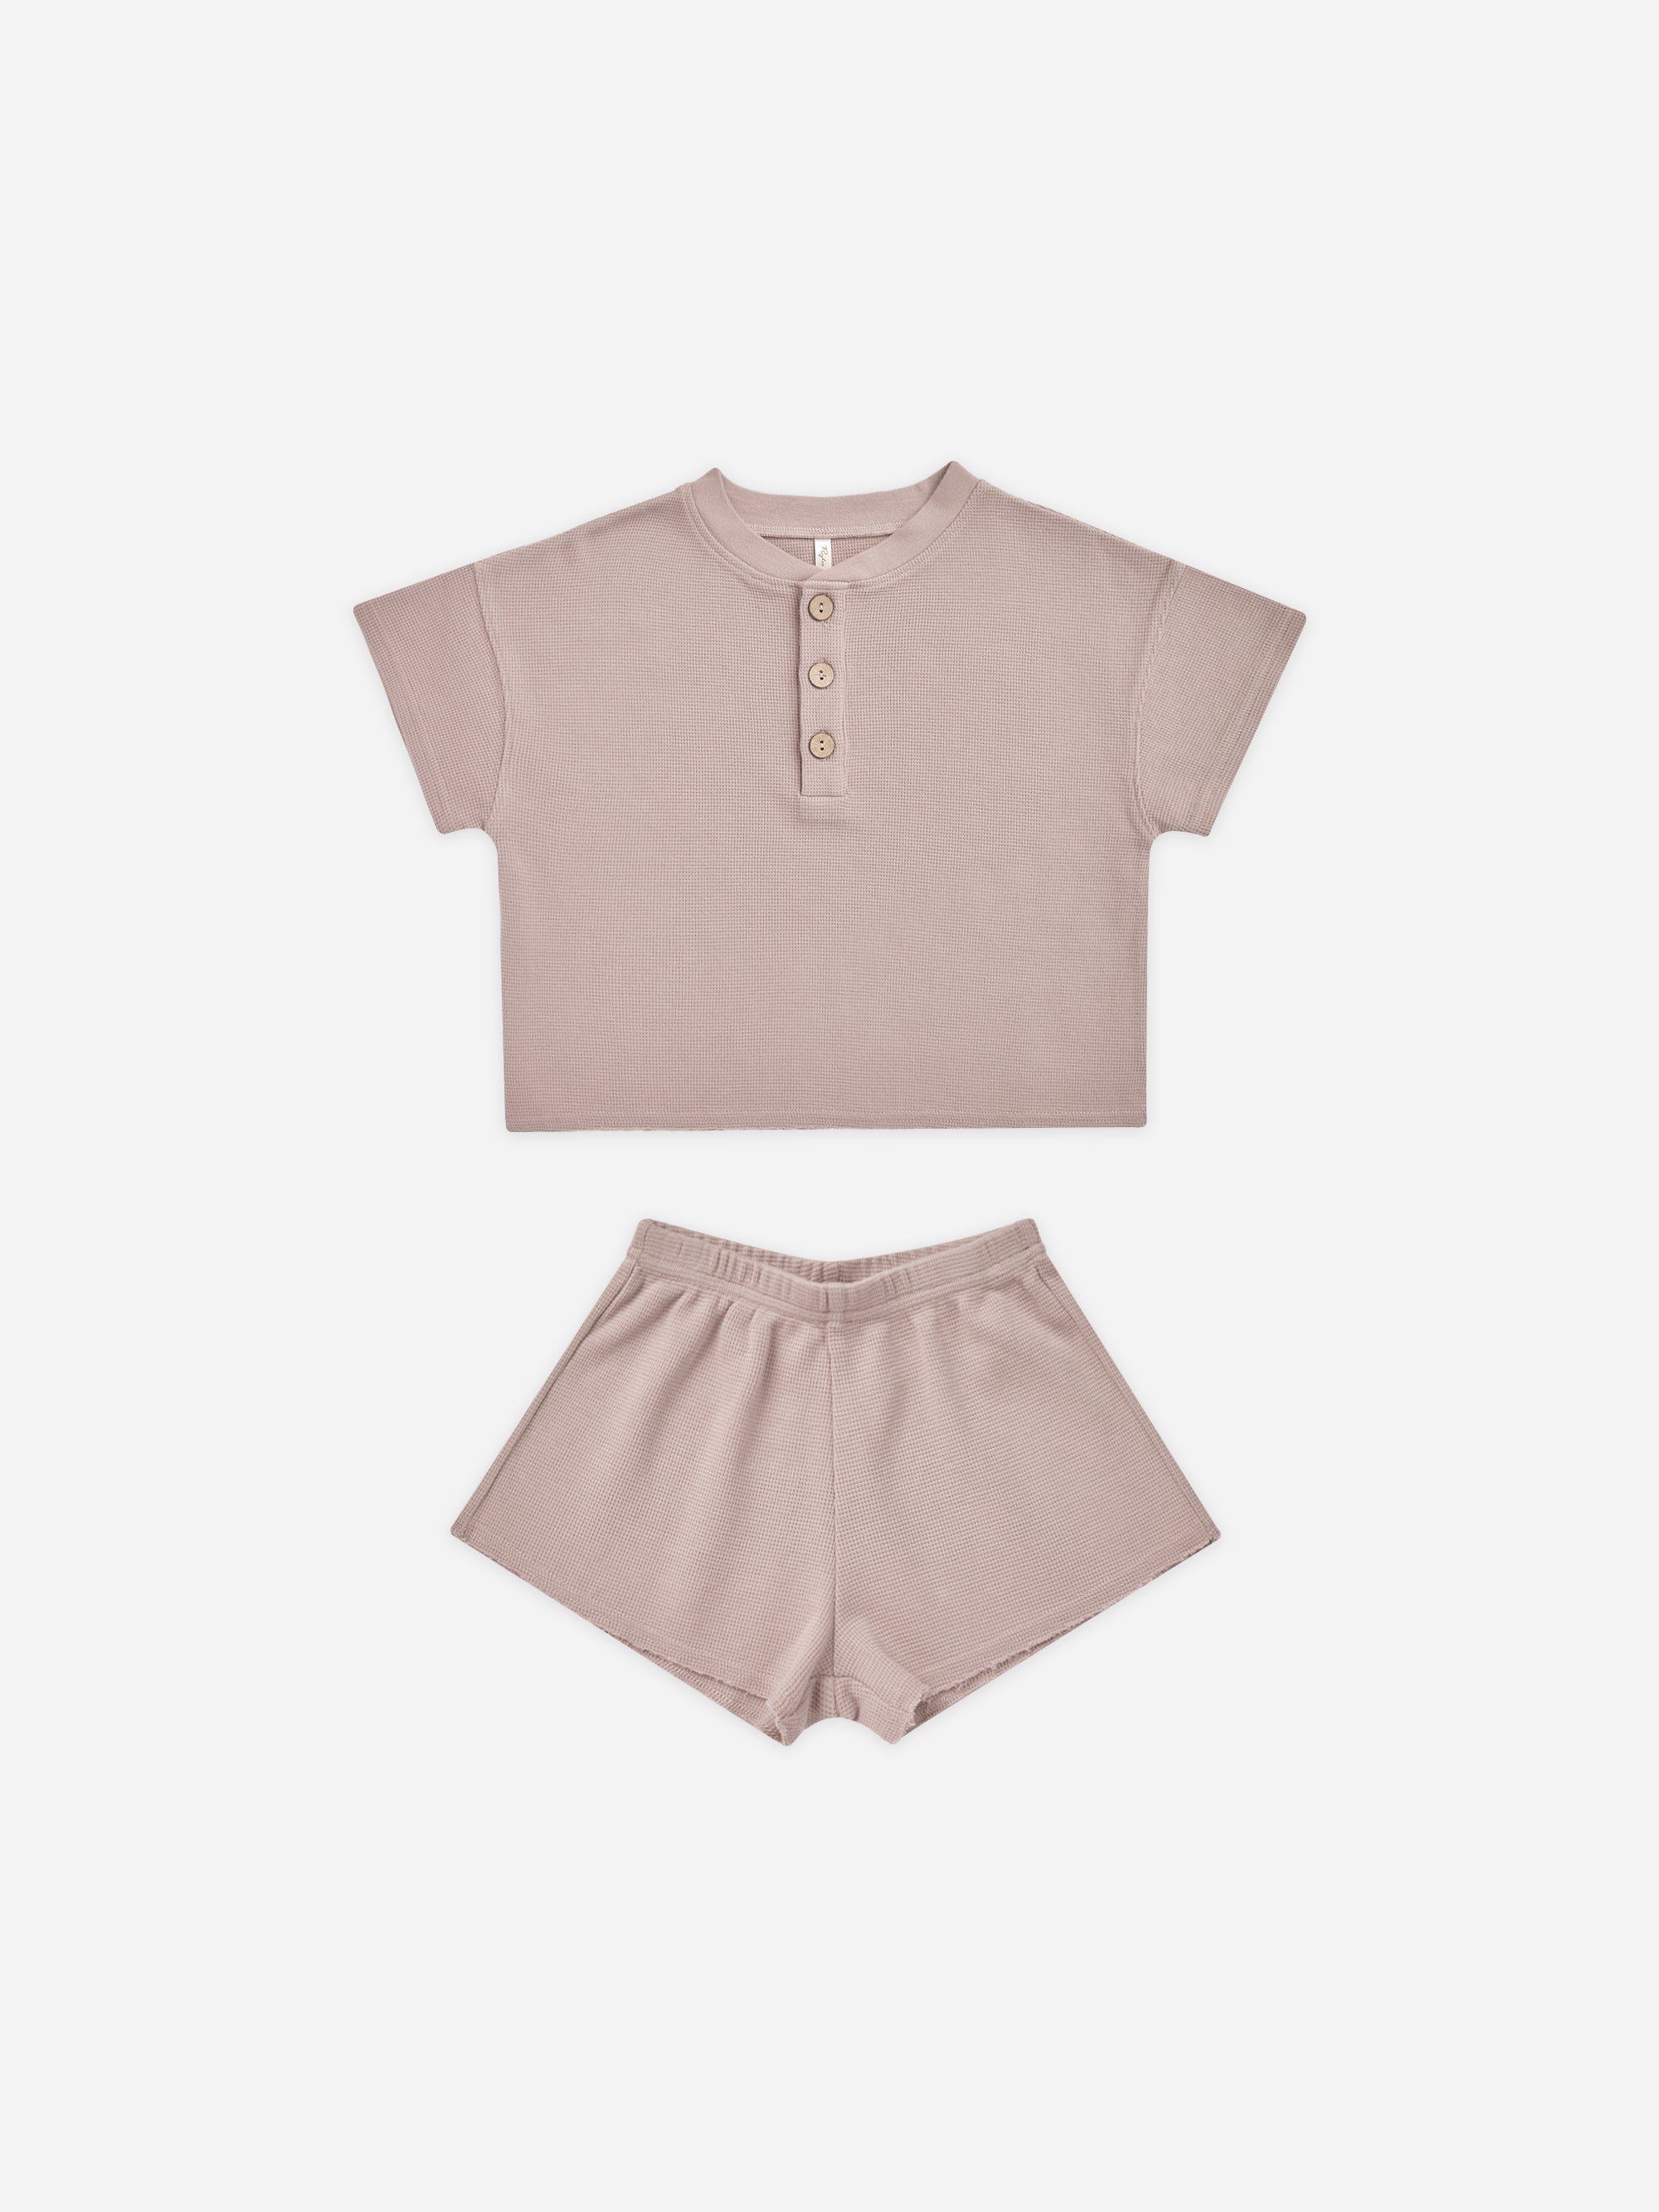 Summer Waffle Set || Mauve - Rylee + Cru | Kids Clothes | Trendy Baby Clothes | Modern Infant Outfits |